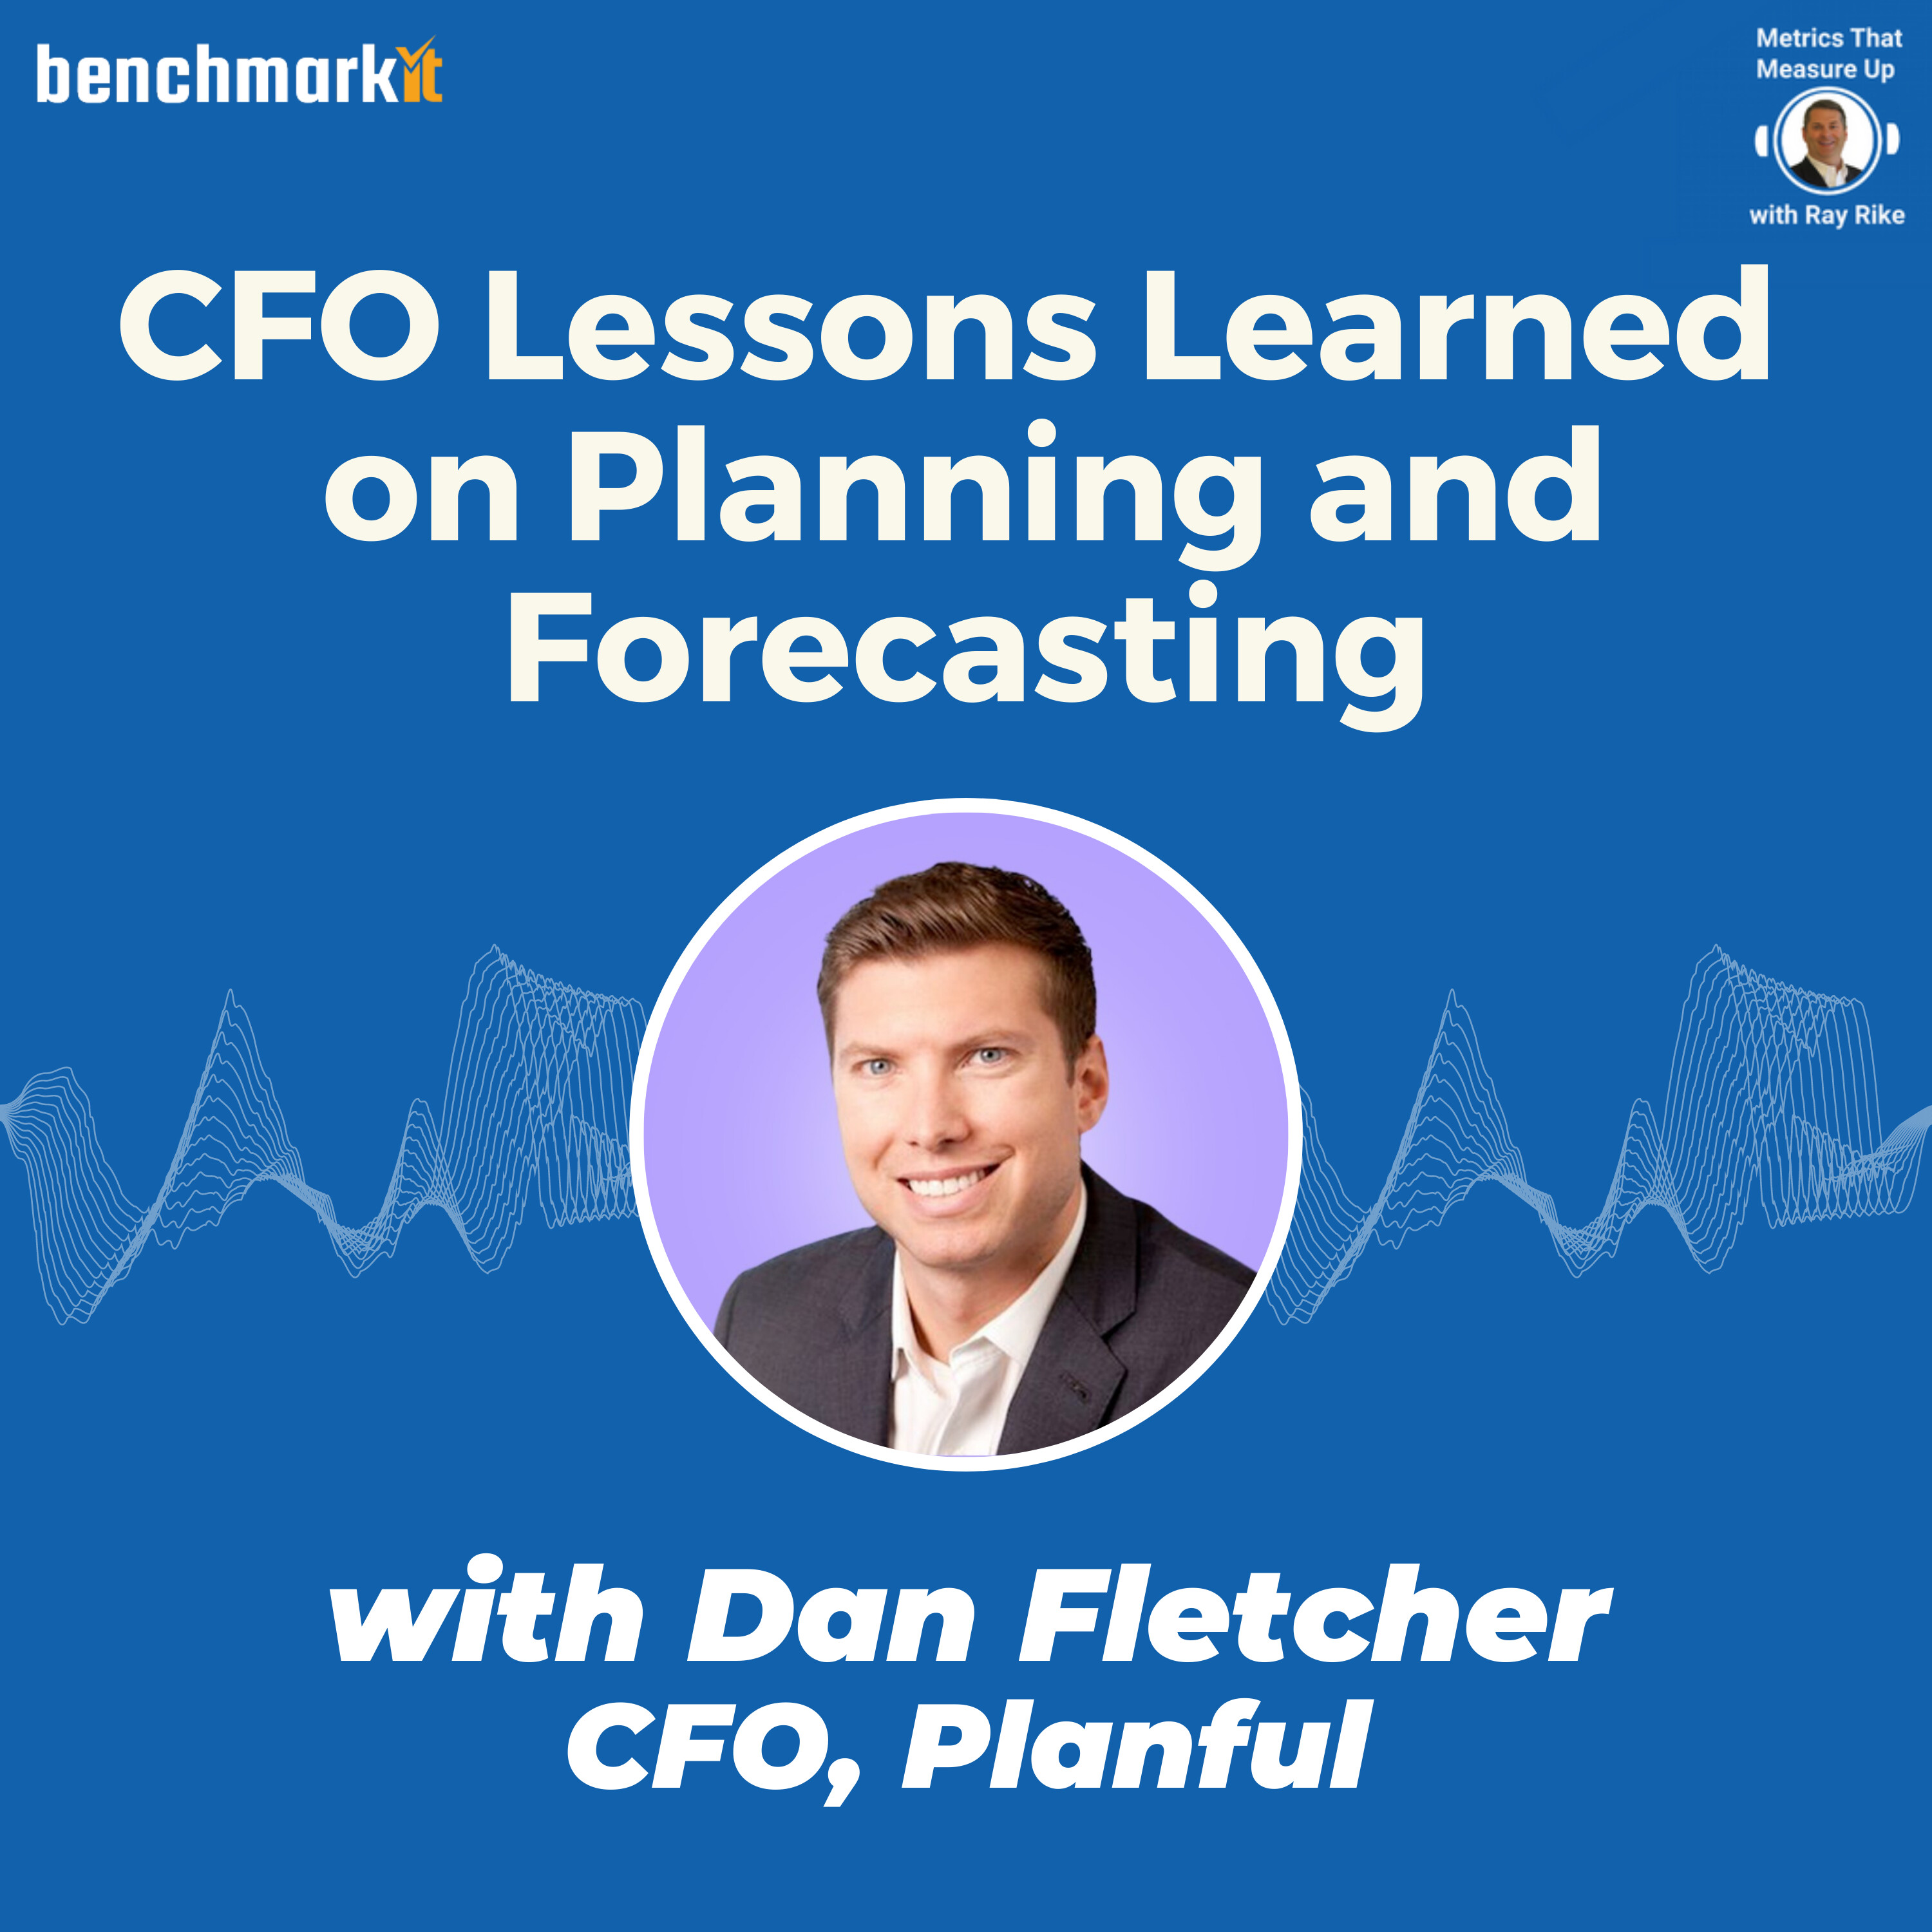 CFO lessons learned in planning and forecasting - with Dan Fletcher, CFO Planful